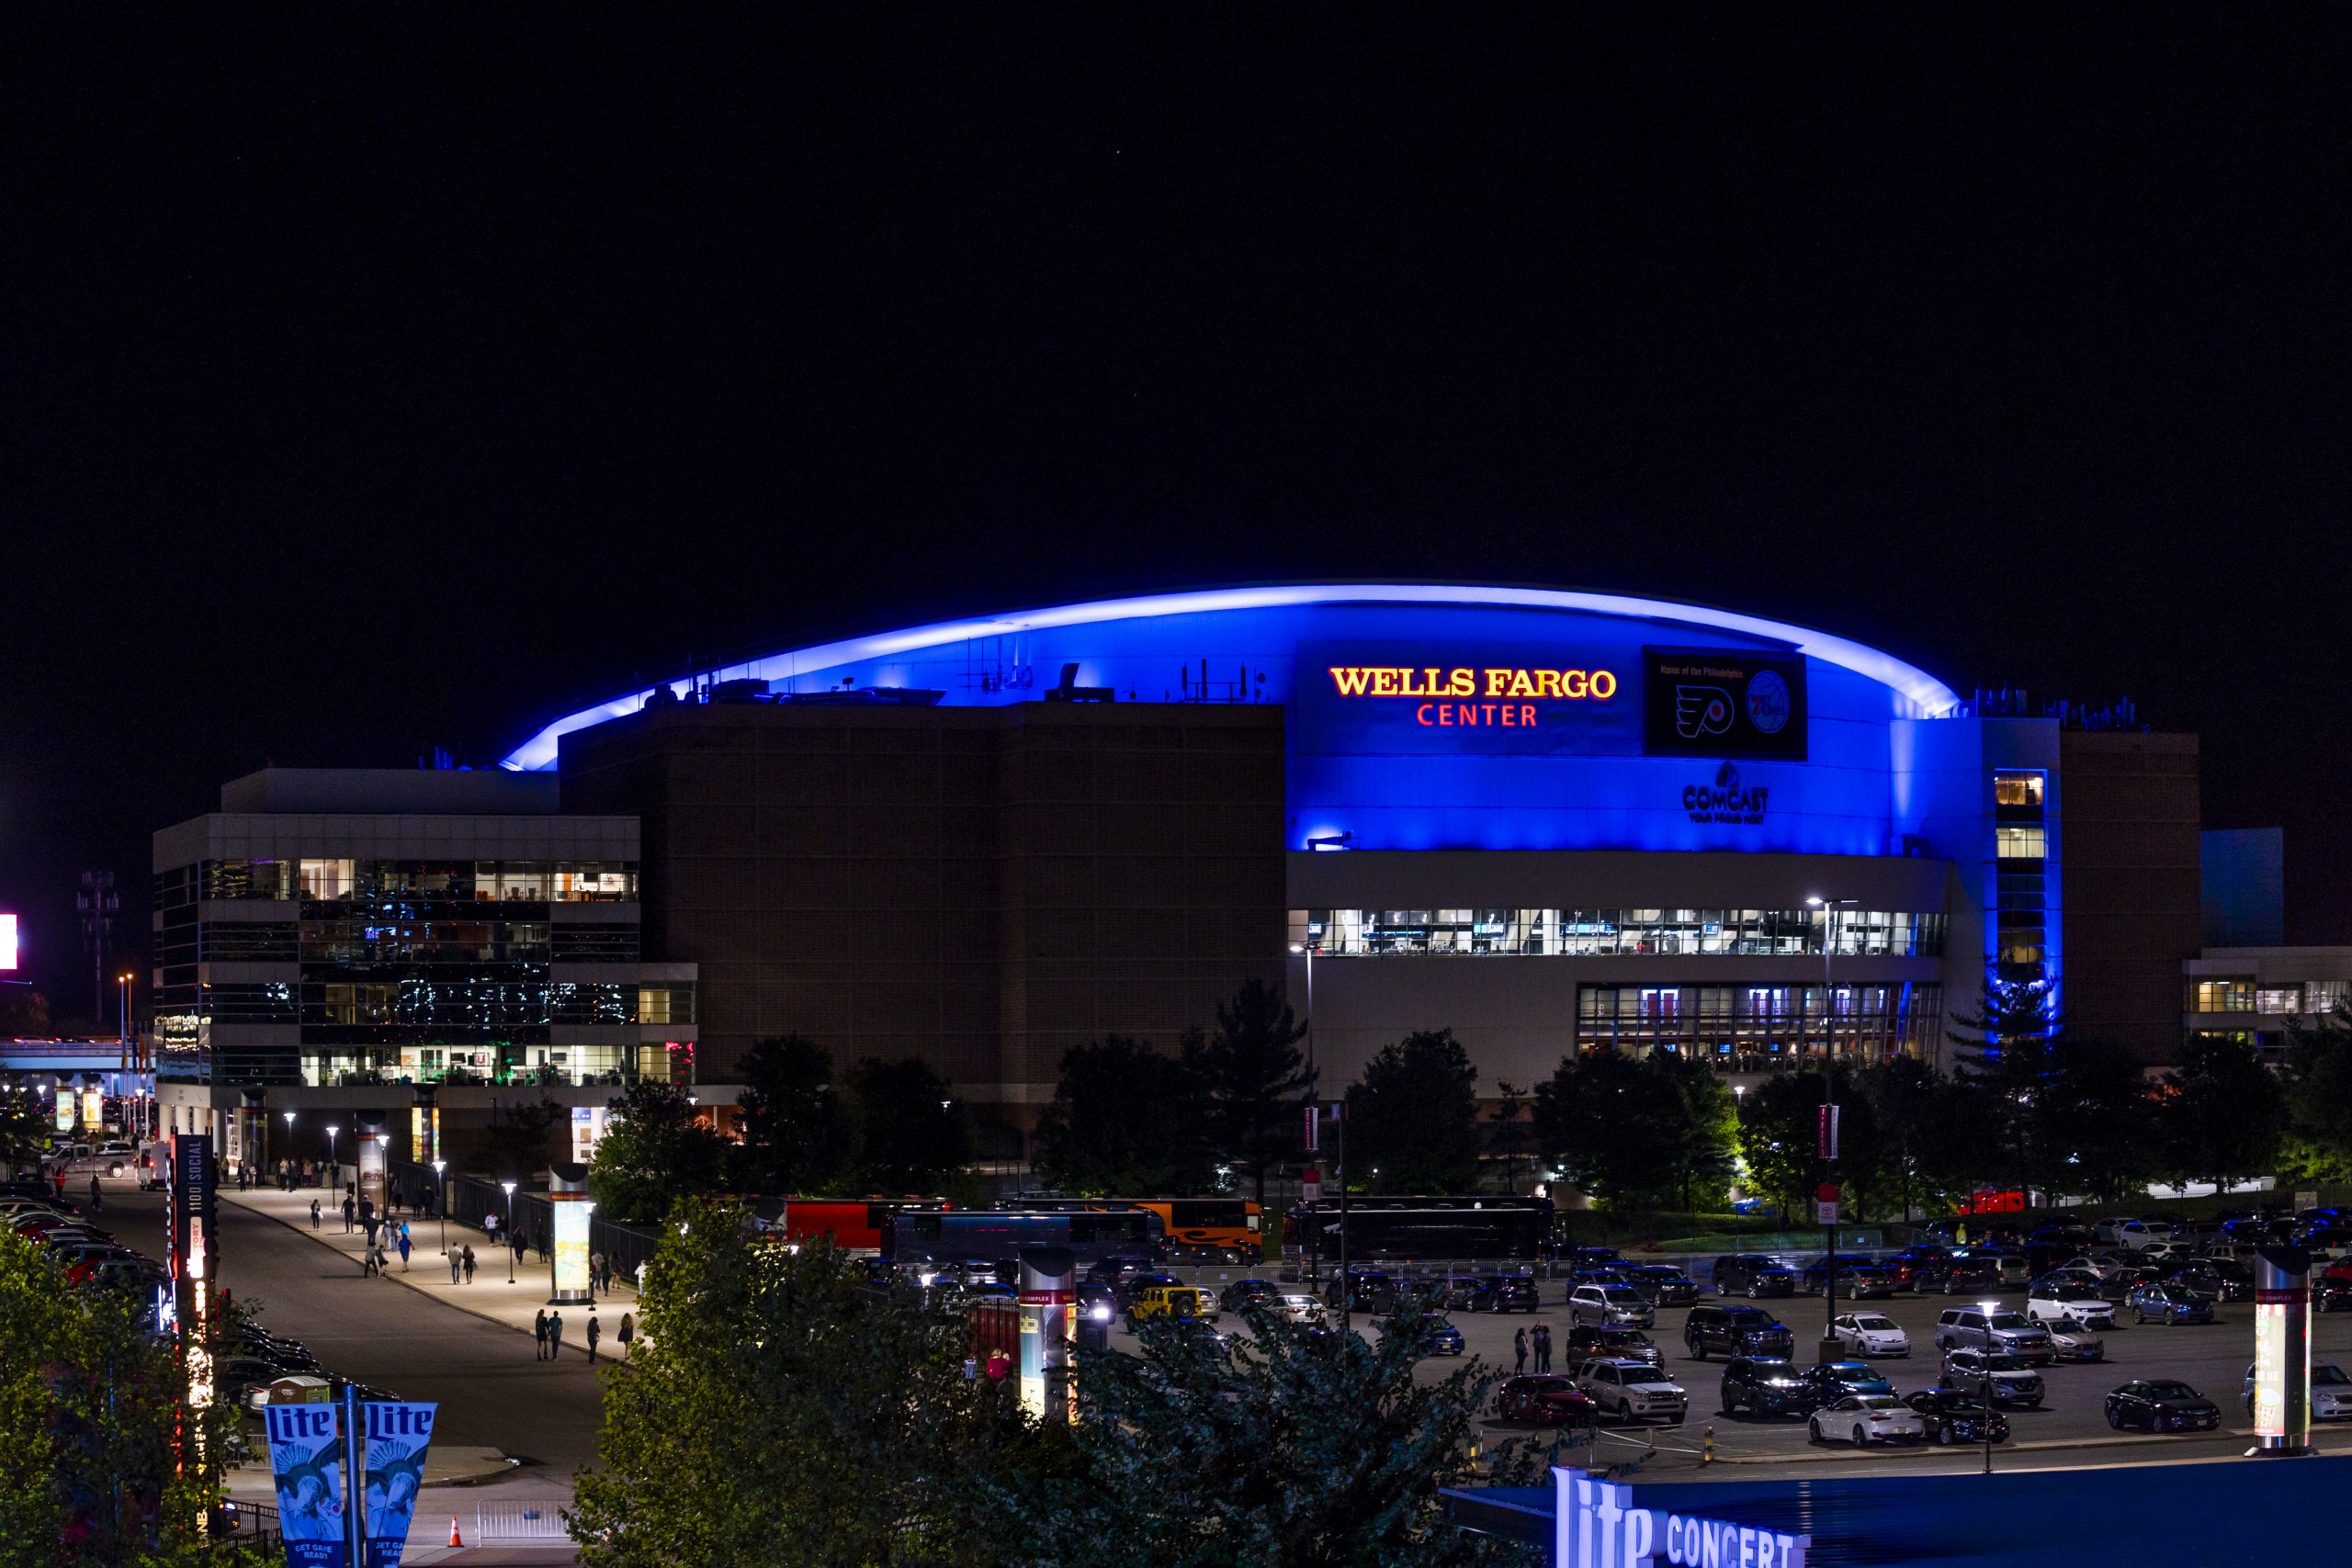 Color photograph depicting the Wells Fargo Center at night. The stadium is illuminated with blue lights and parking lot is in foreground.